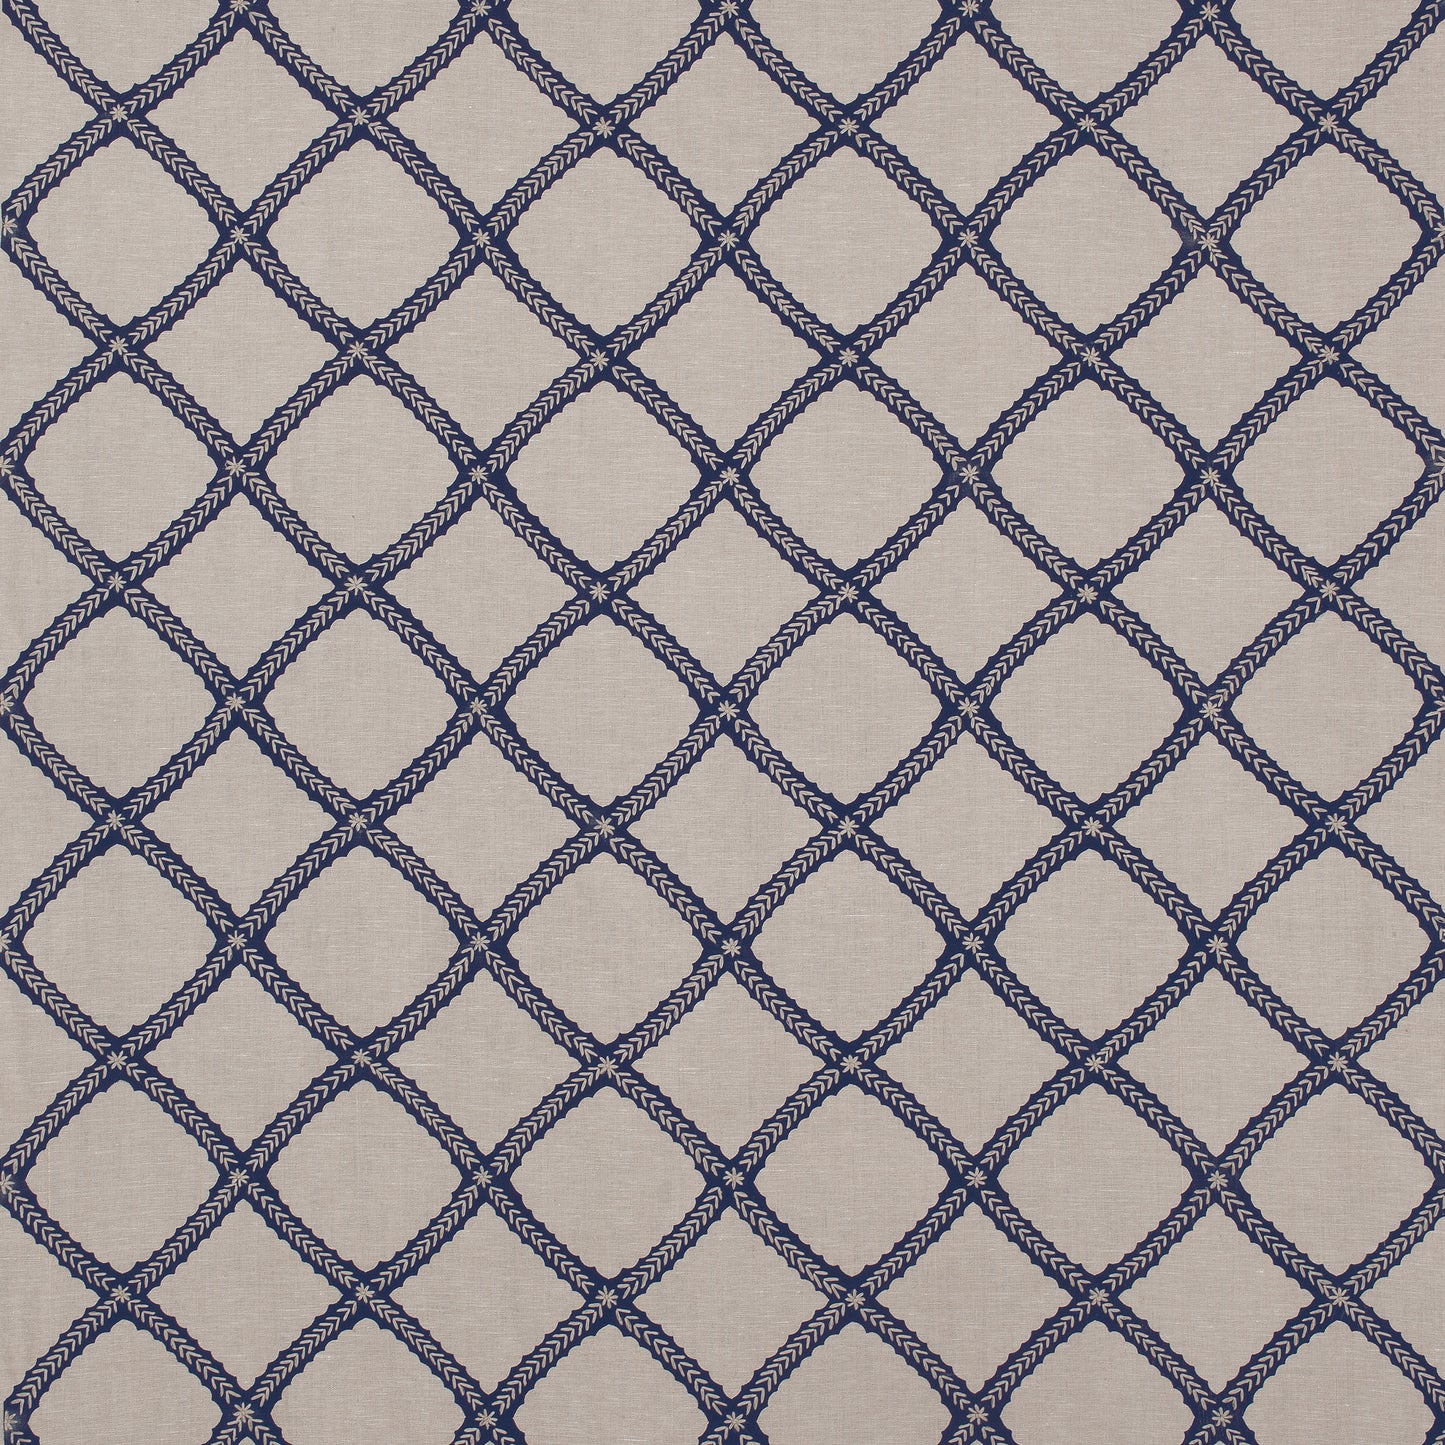 Purchase Thibaut Fabric Pattern number W788707 pattern name Majuli Embroidery color Navy on Flax